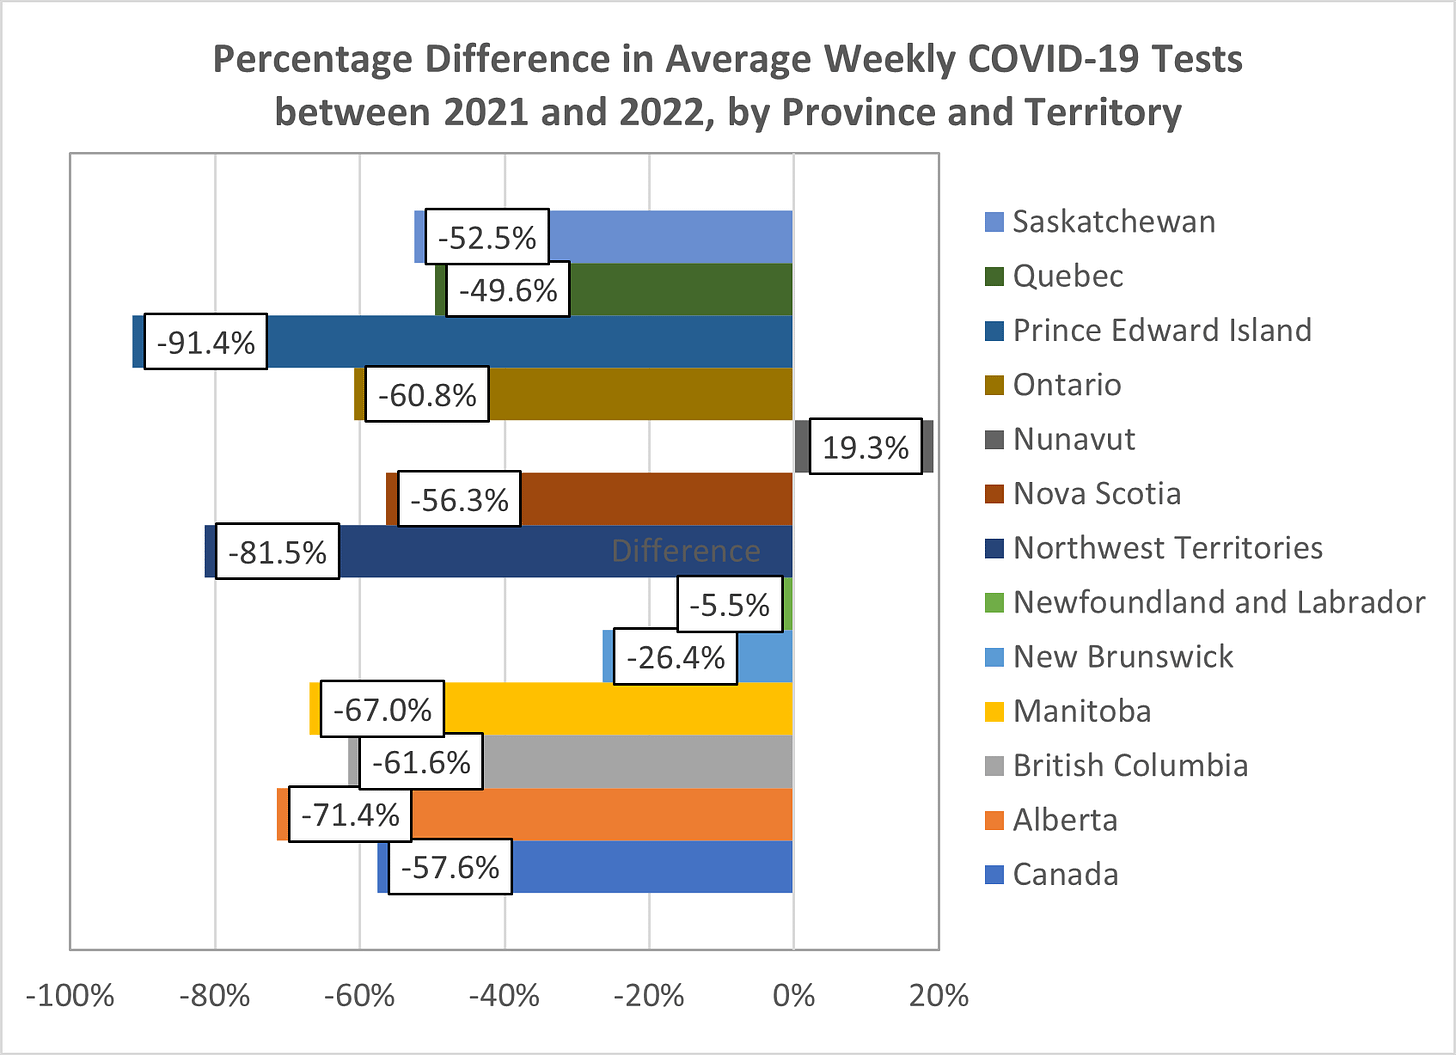 Bar chart showing percentage difference in average weekly covid tests in Canada between 2021 and 2022 (with 2022 data up to November 19th) by province and territory (excluding Yukon, as no data is available) Saskatchewan: -52.5% Quebec: -49.6% Prince Edward Island: -91.4% Ontario: -60.8% Nunavut: +19.3% Nova Scotia: -56.3% Northwest Territories: -81.5% Newfoundland and Labrador: -5.5% New Brunswick: -26.4% Manitoba: -67.0% British Columbia: -61.6% Alberta: -71.4% Canada: -57.6%